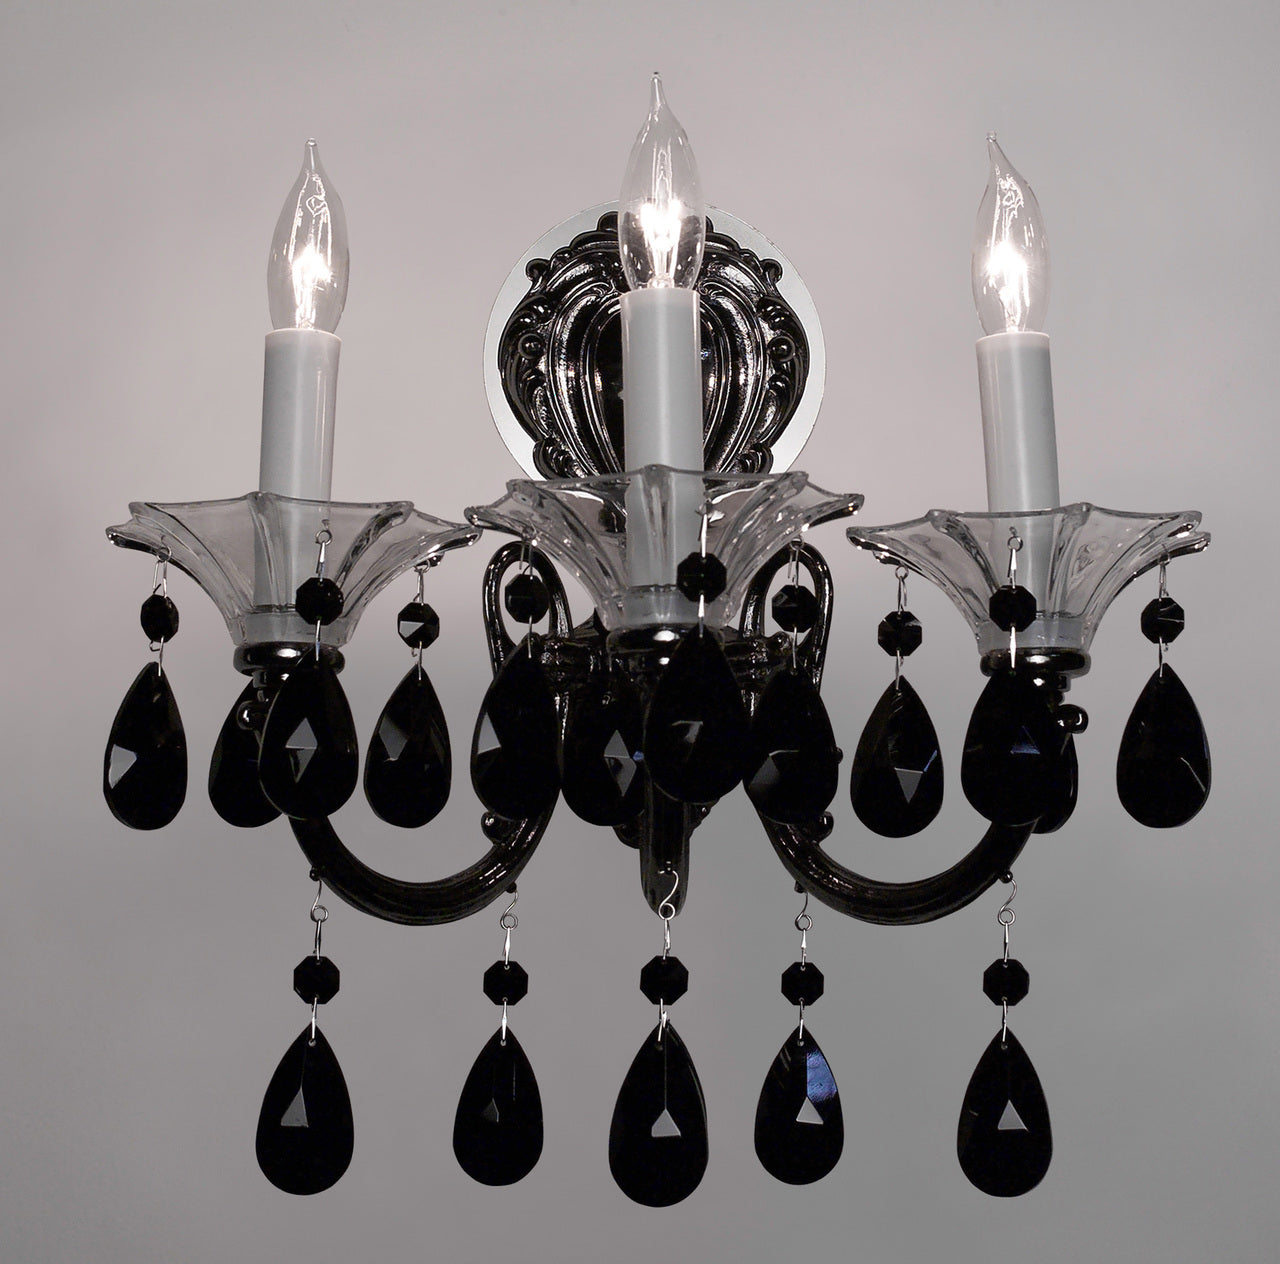 Classic Lighting 57053 EP SC Via Lombardi Crystal Wall Sconce in Ebony Pearl (Imported from Spain)